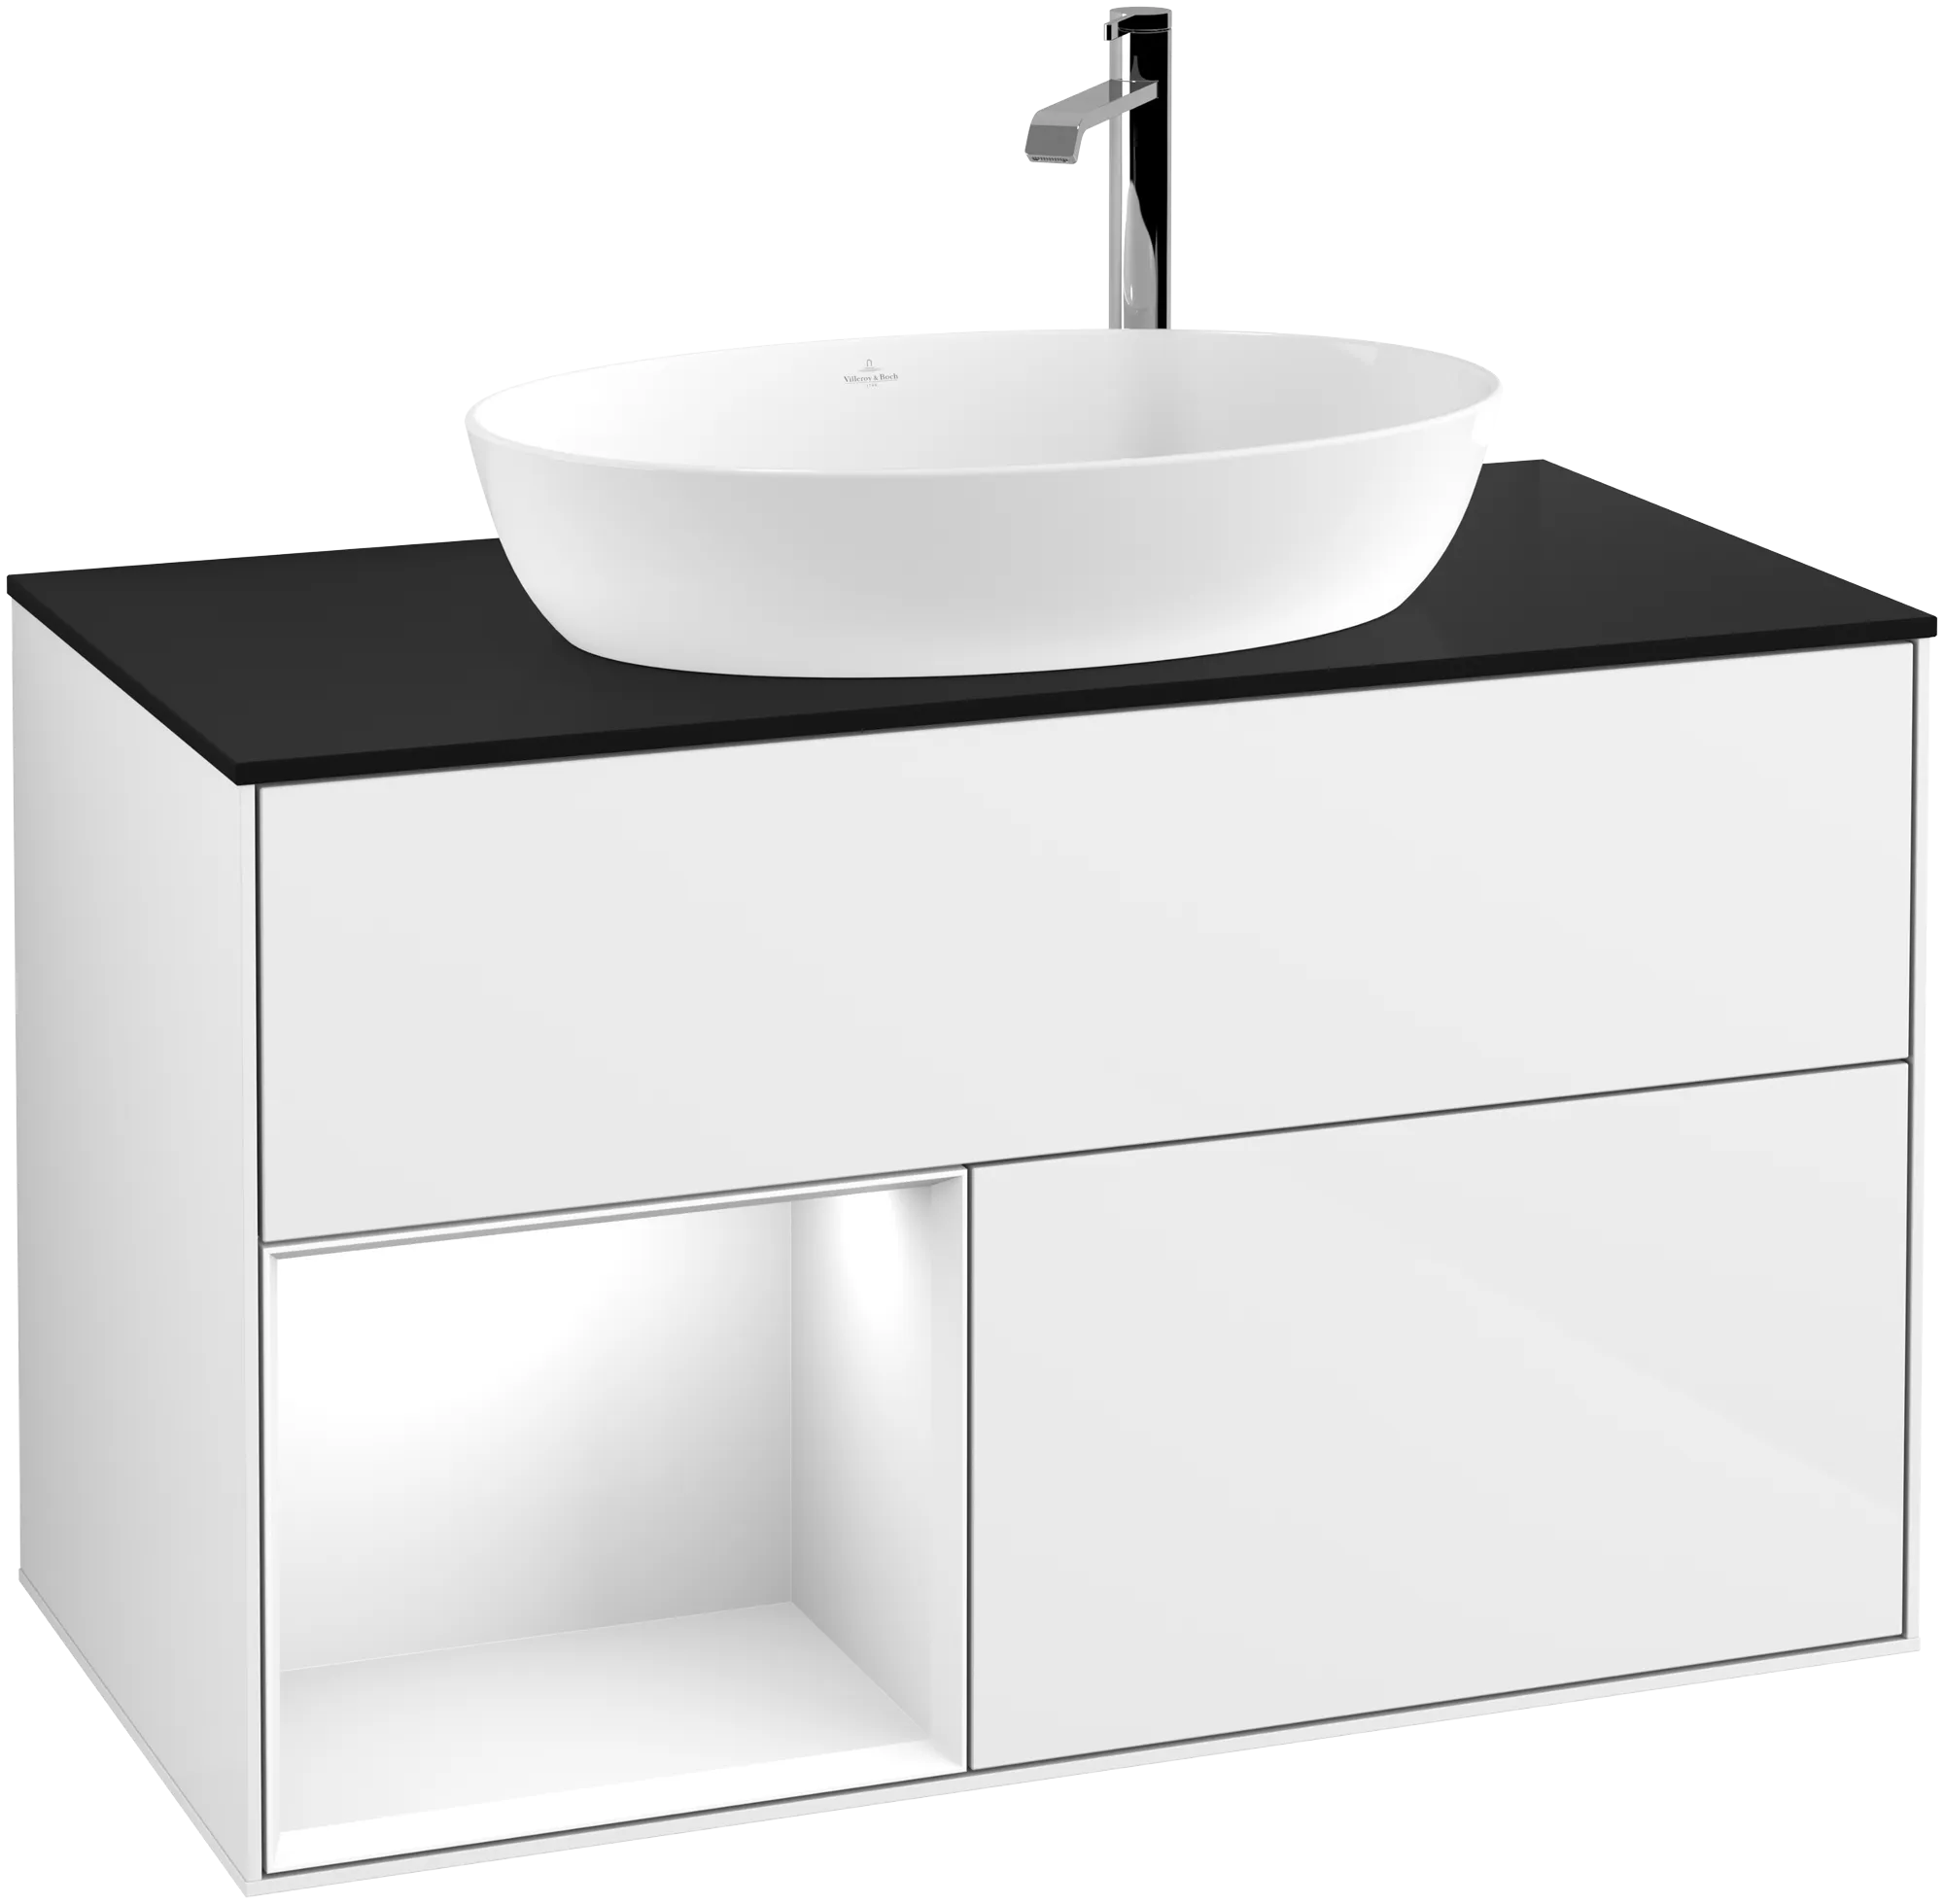 VILLEROY BOCH Finion Vanity unit, with lighting, 2 pull-out compartments, 1000 x 603 x 501 mm, Glossy White Lacquer / Glossy White Lacquer / Glass Black Matt #G892GFGF resmi